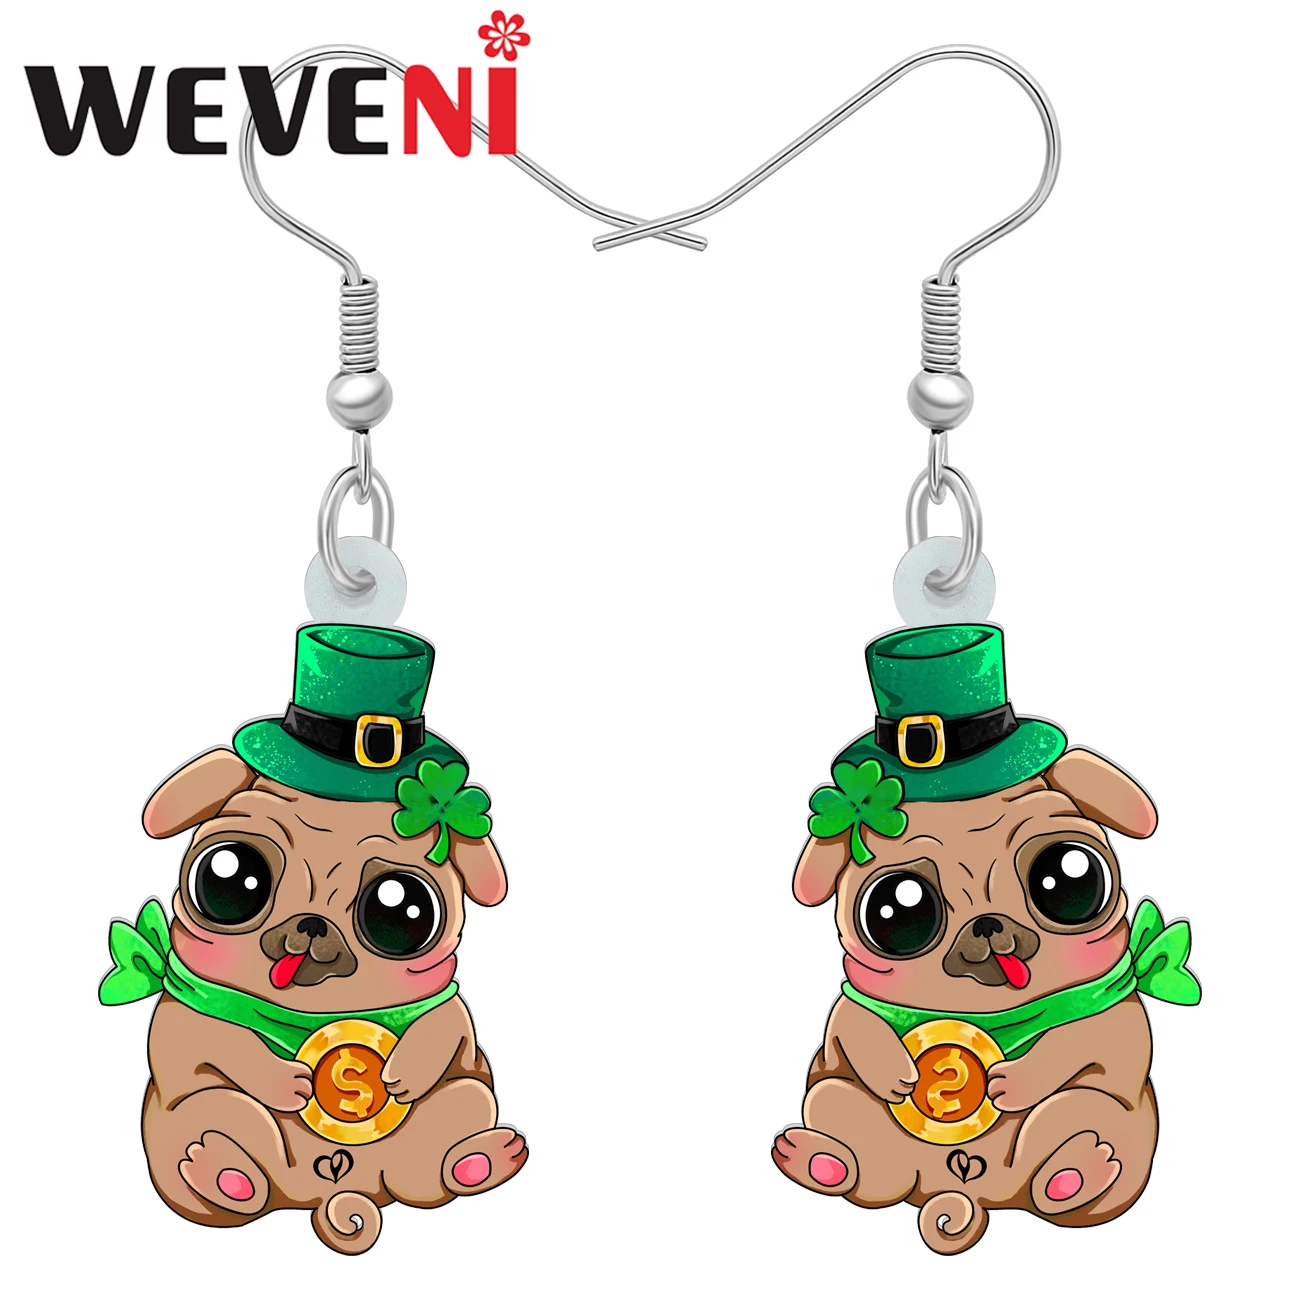 Weveni Acrylic St Patricks Day Hat Big Eyes Coins Pug Earrings Cute Novelty Browns Dogs Dangle Drop For Women Gifts Accessories